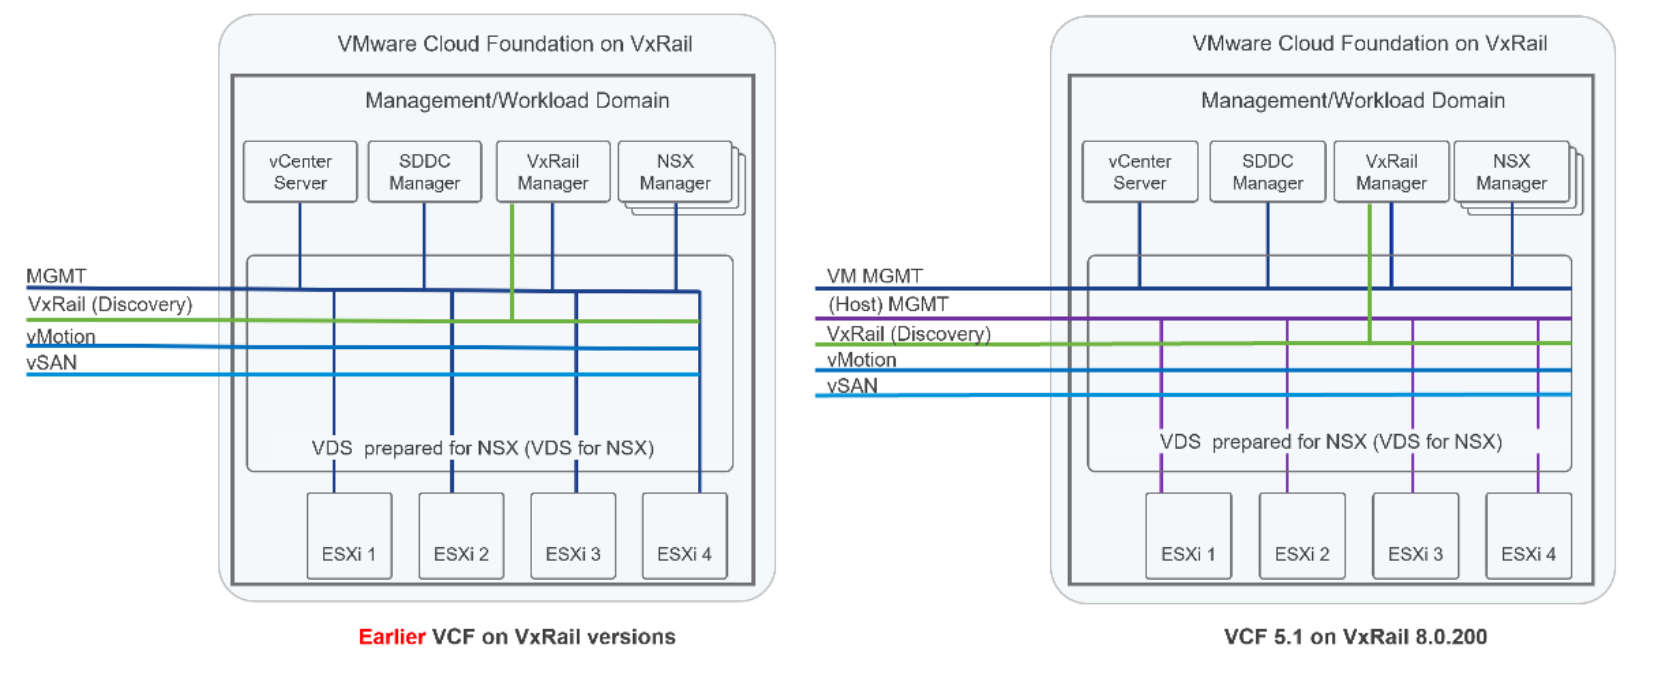 This figure shows the network topology deployed by VCF on VxRail.